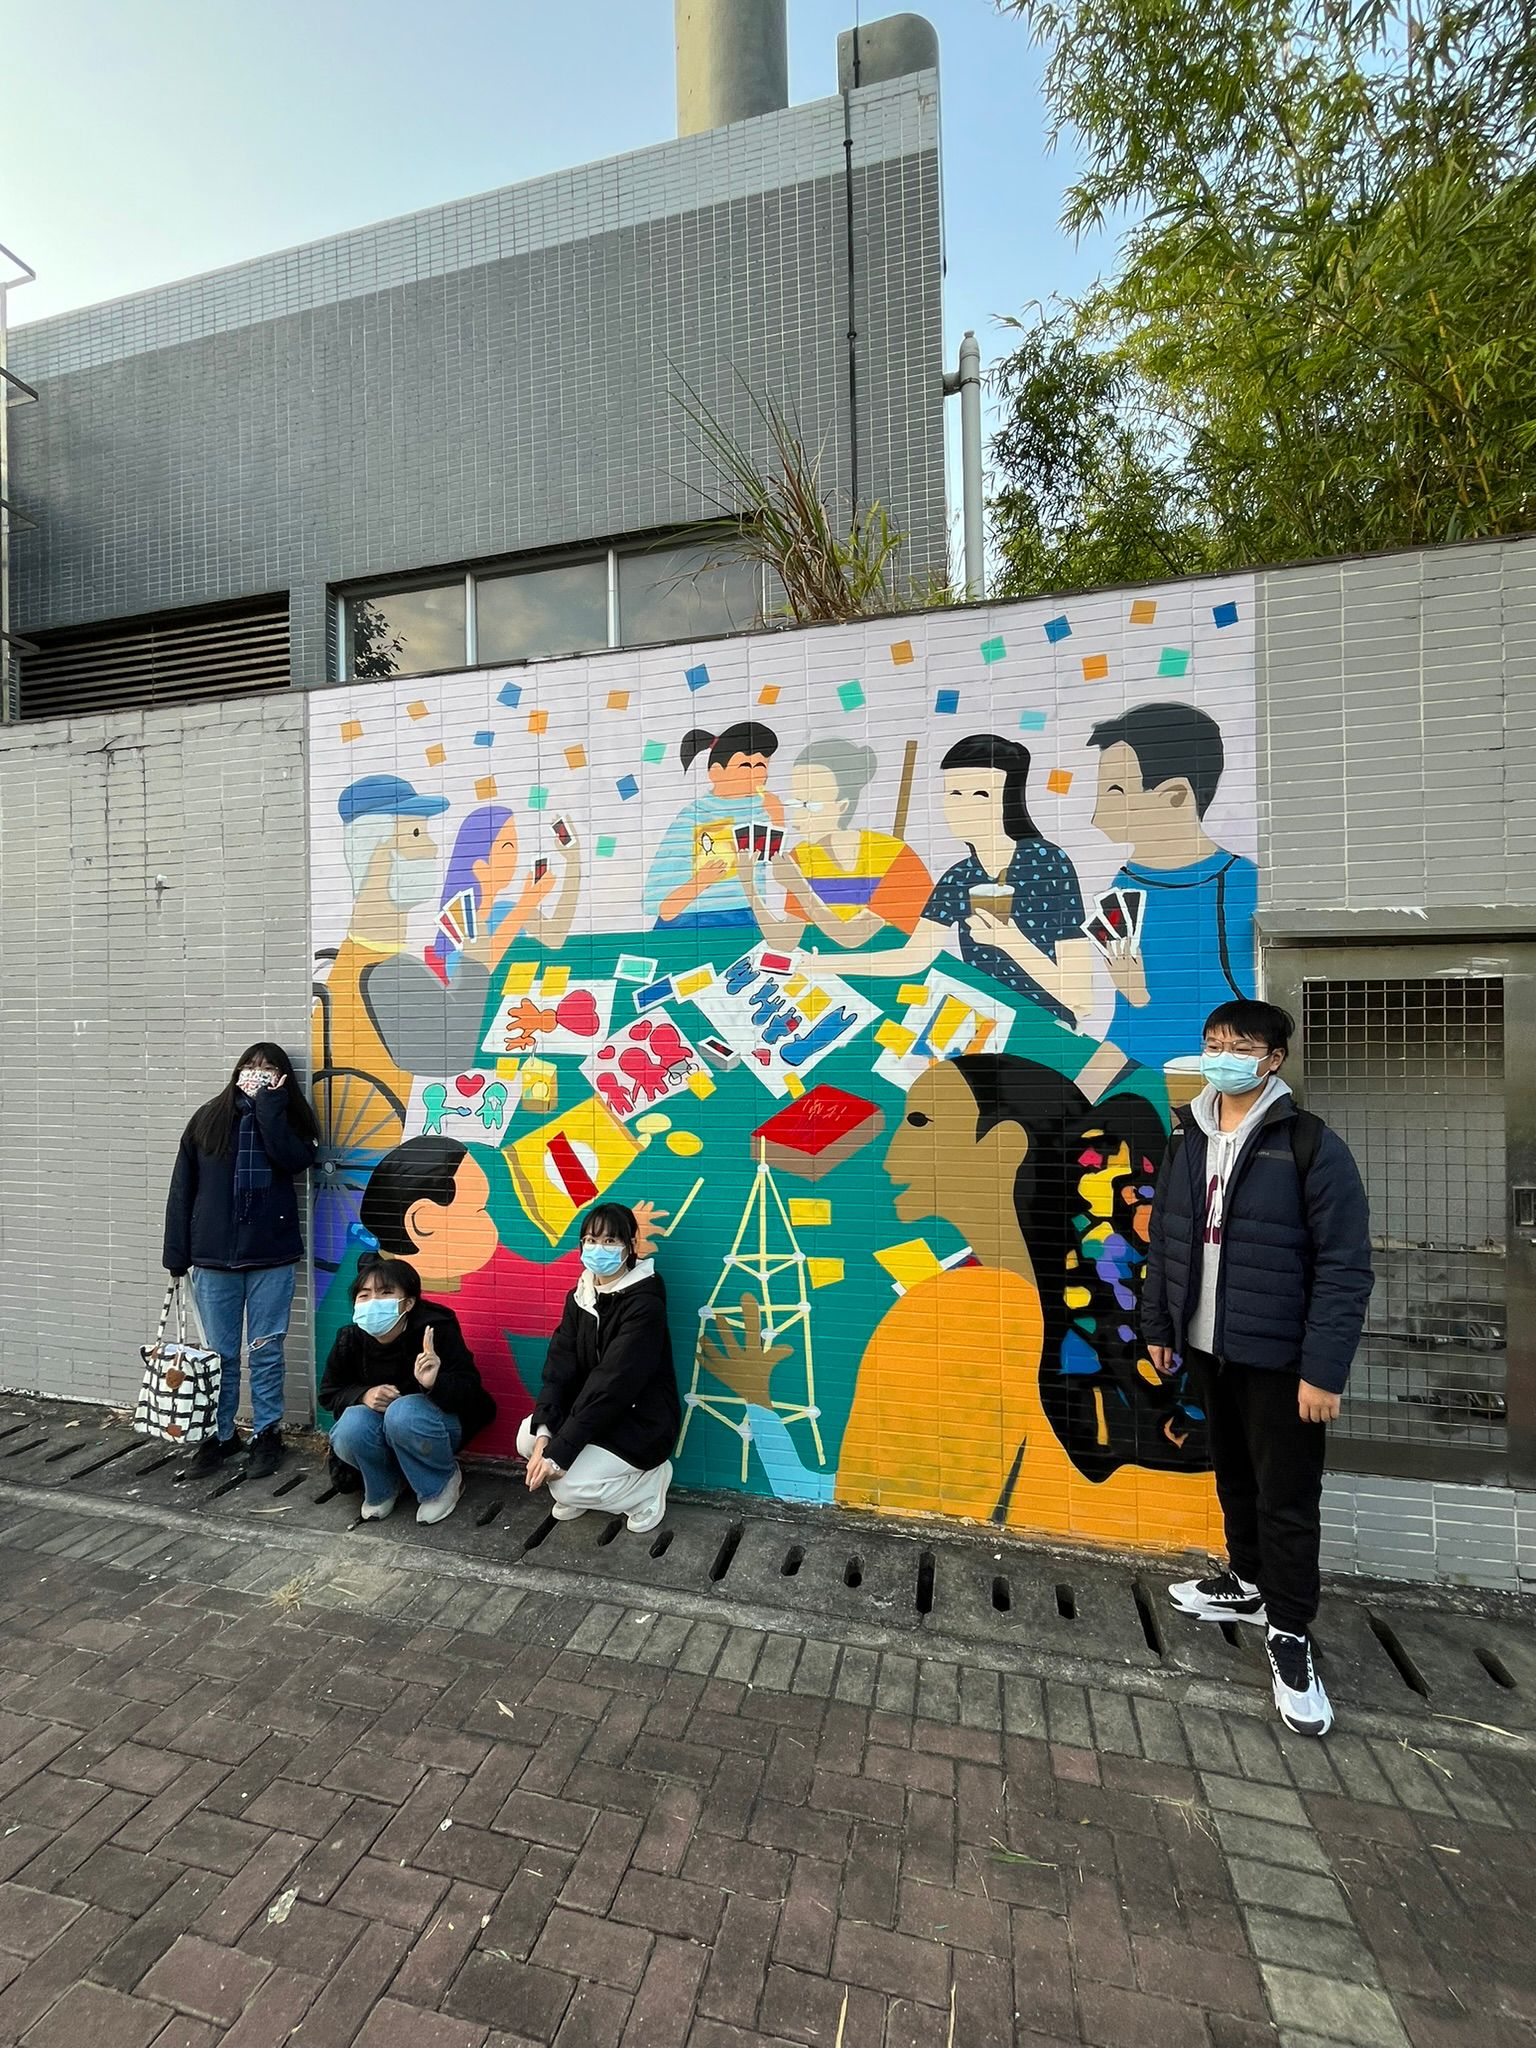 The youth participants from Ma On Shan District involved in the project took a group photo with the mural "Love is Colorful" located on the partial exterior wall of Pak Shek Kok Sewage Pumping Station No.1. The mural reflected the experiences and feelings of young people during street surveys in the area